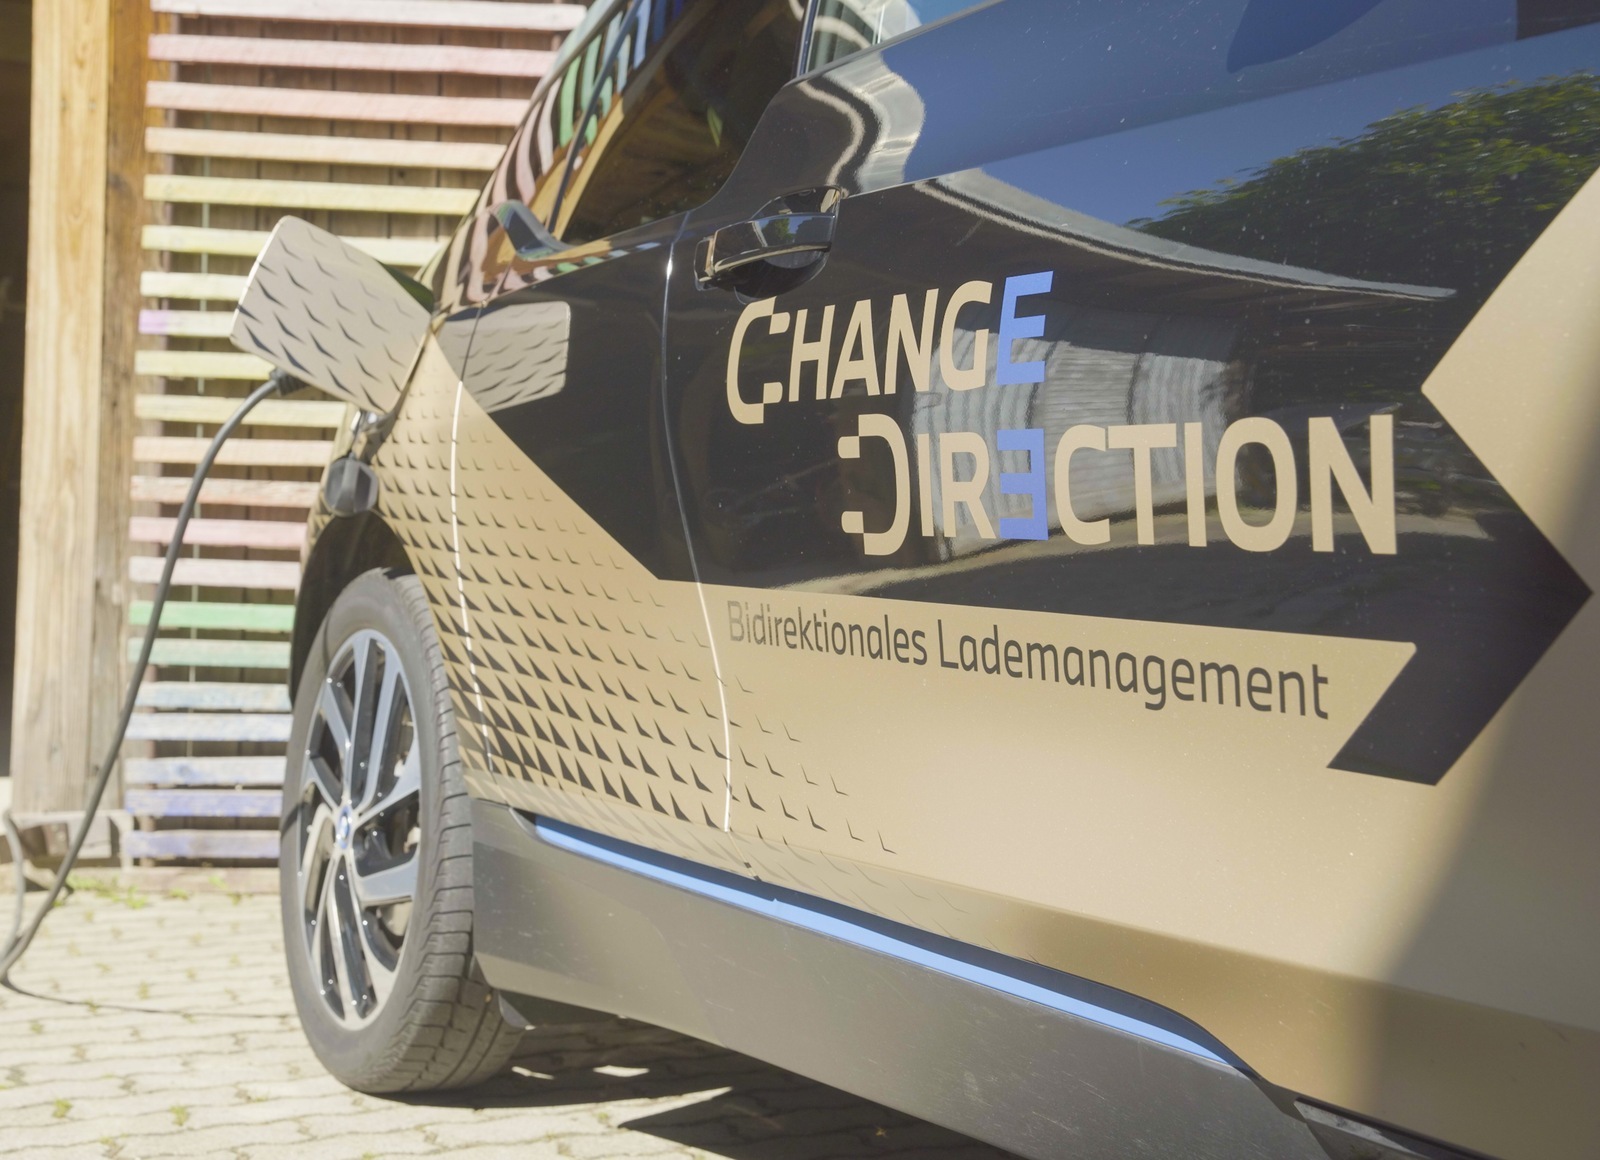 EV charging BMW and Eon launch bidirectional charging project